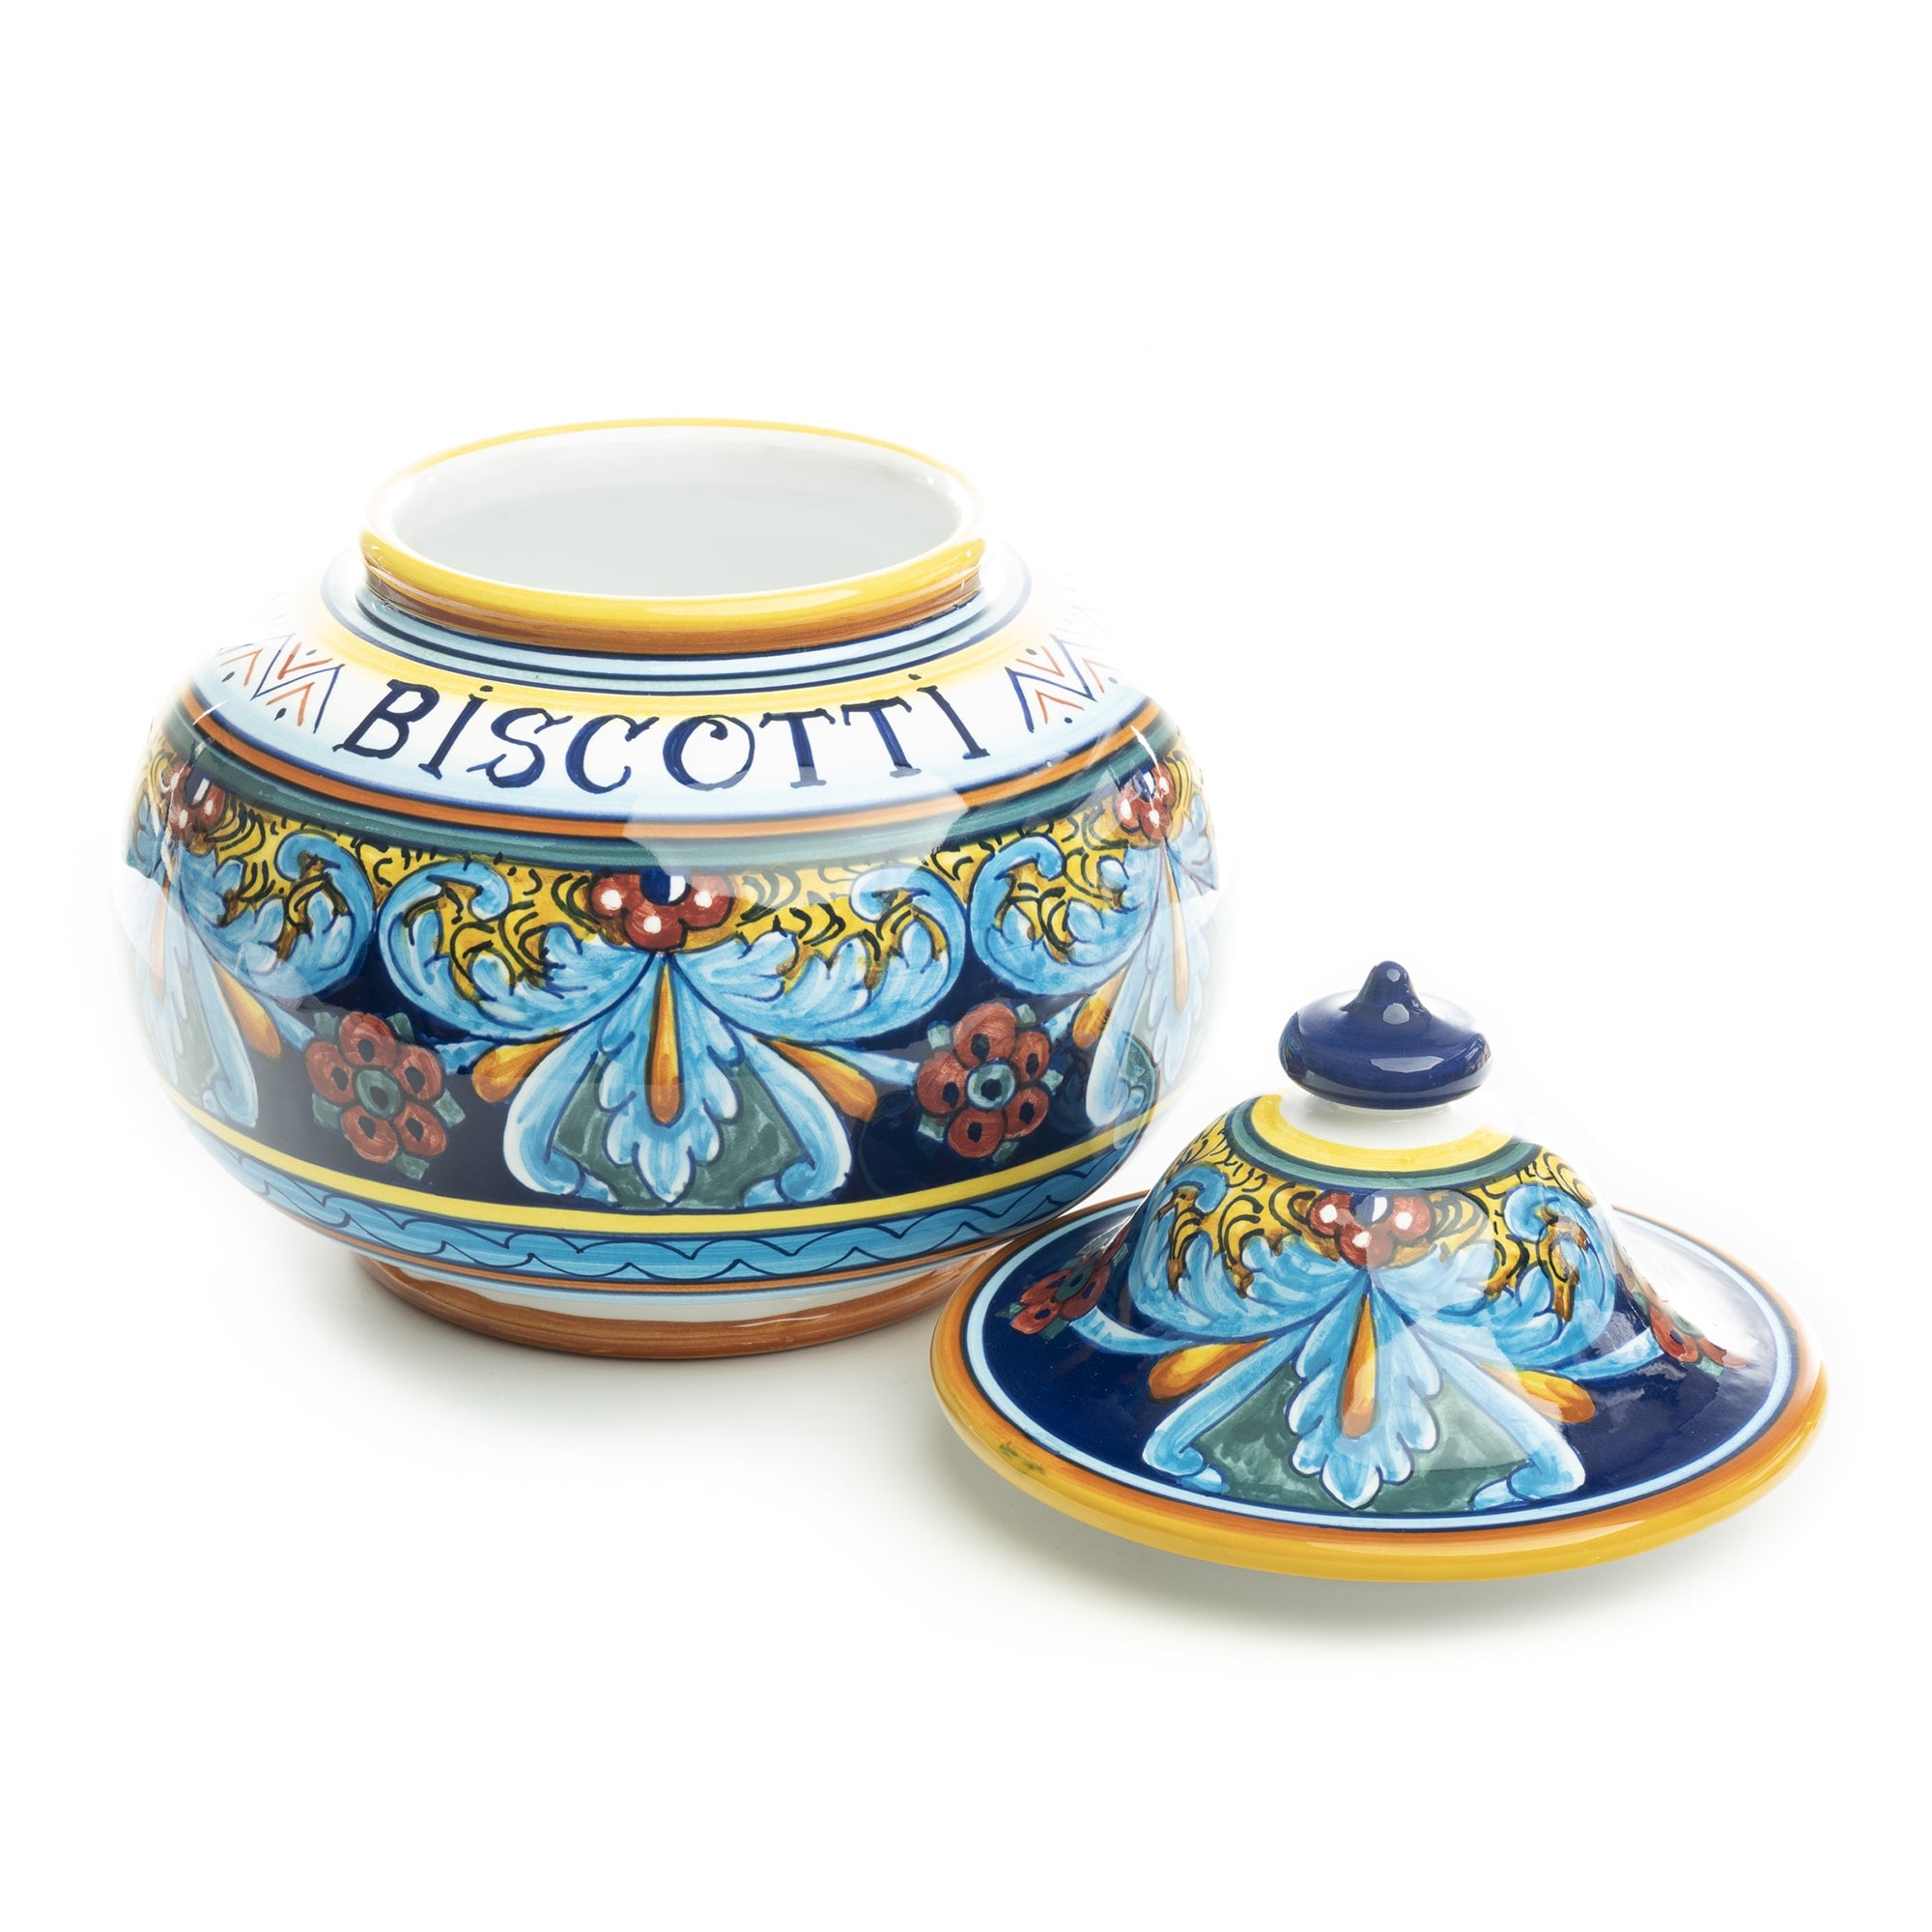 Collectible Majolica Round Biscotti Jar B-64, ceramics, pottery, italian design, majolica, handmade, handcrafted, handpainted, home decor, kitchen art, home goods, deruta, majolica, Artisan, treasures, traditional art, modern art, gift ideas, style, SF, shop small business, artists, shop online, landmark store, legacy, one of a kind, limited edition, gift guide, gift shop, retail shop, decorations, shopping, italy, home staging, home decorating, home interiors